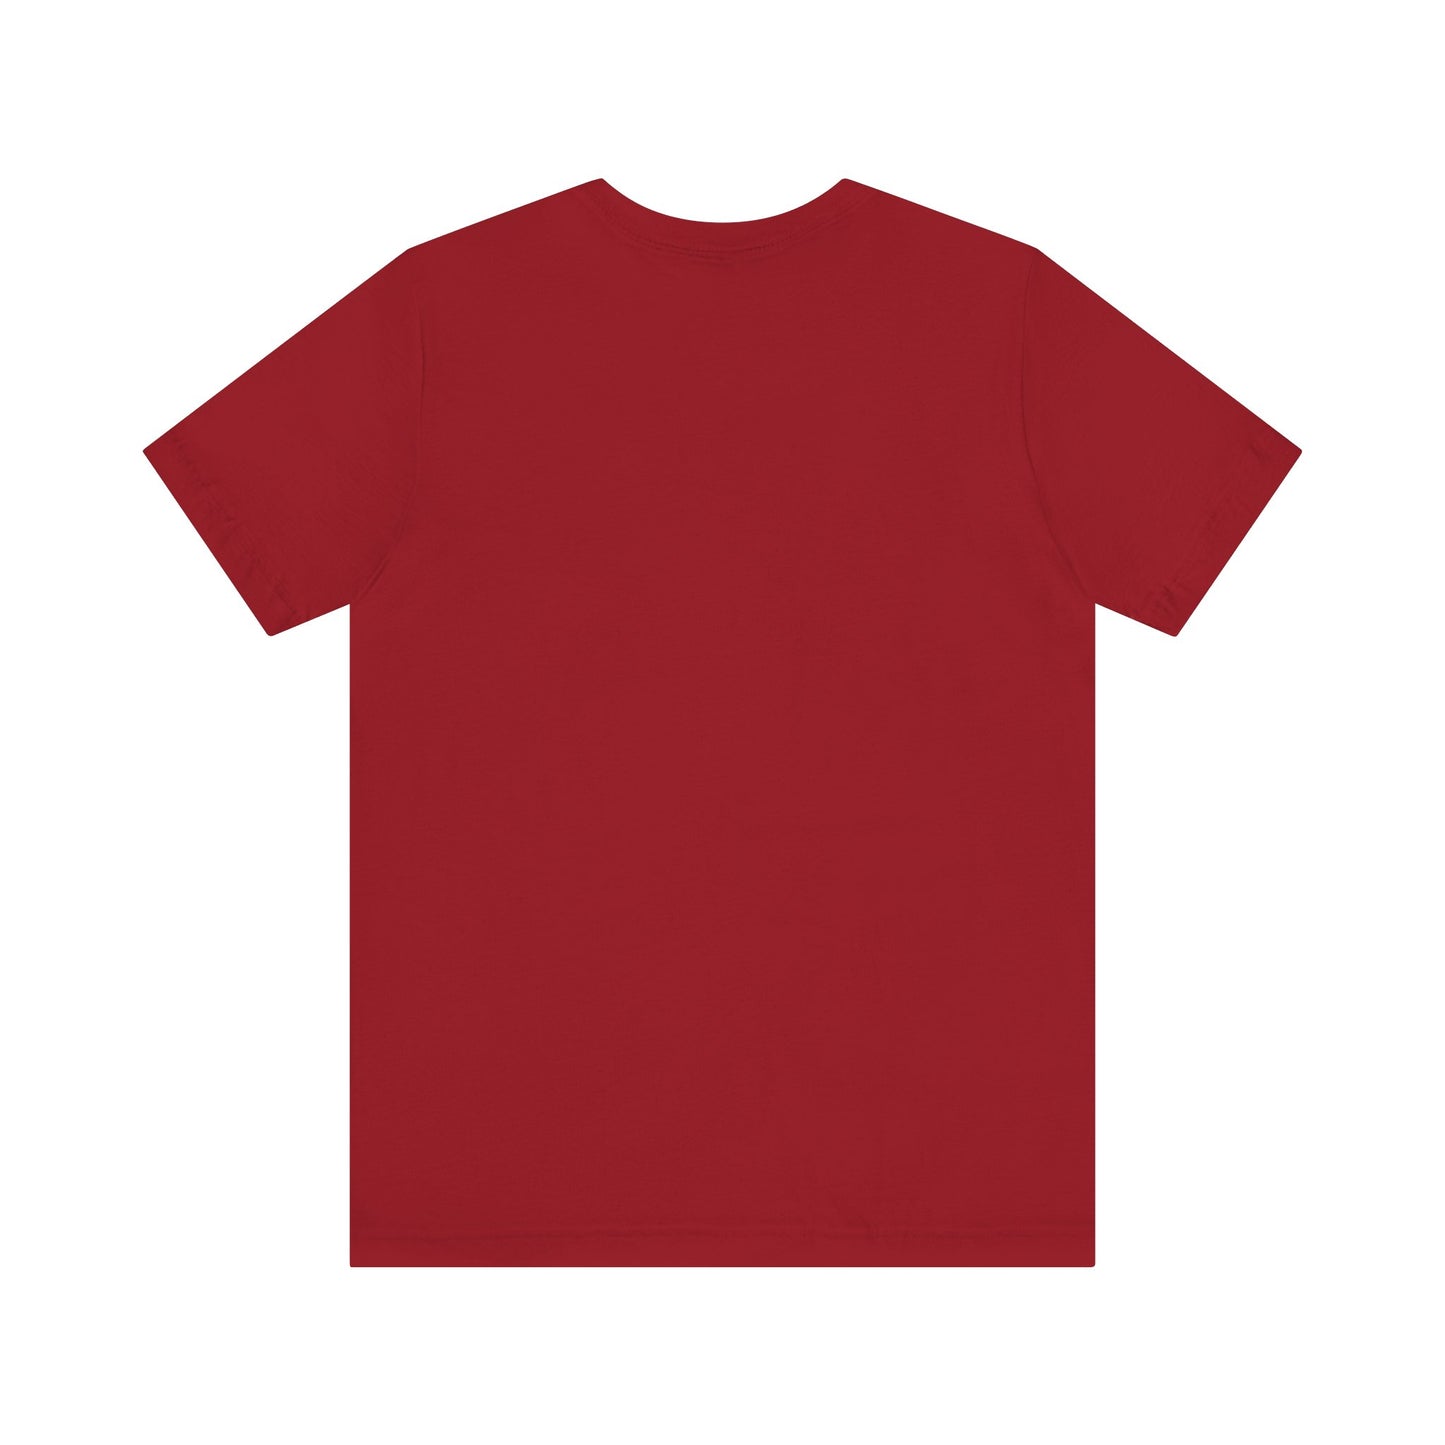 Solid Heather Red. Unisex Jersey Short Sleeve Tee